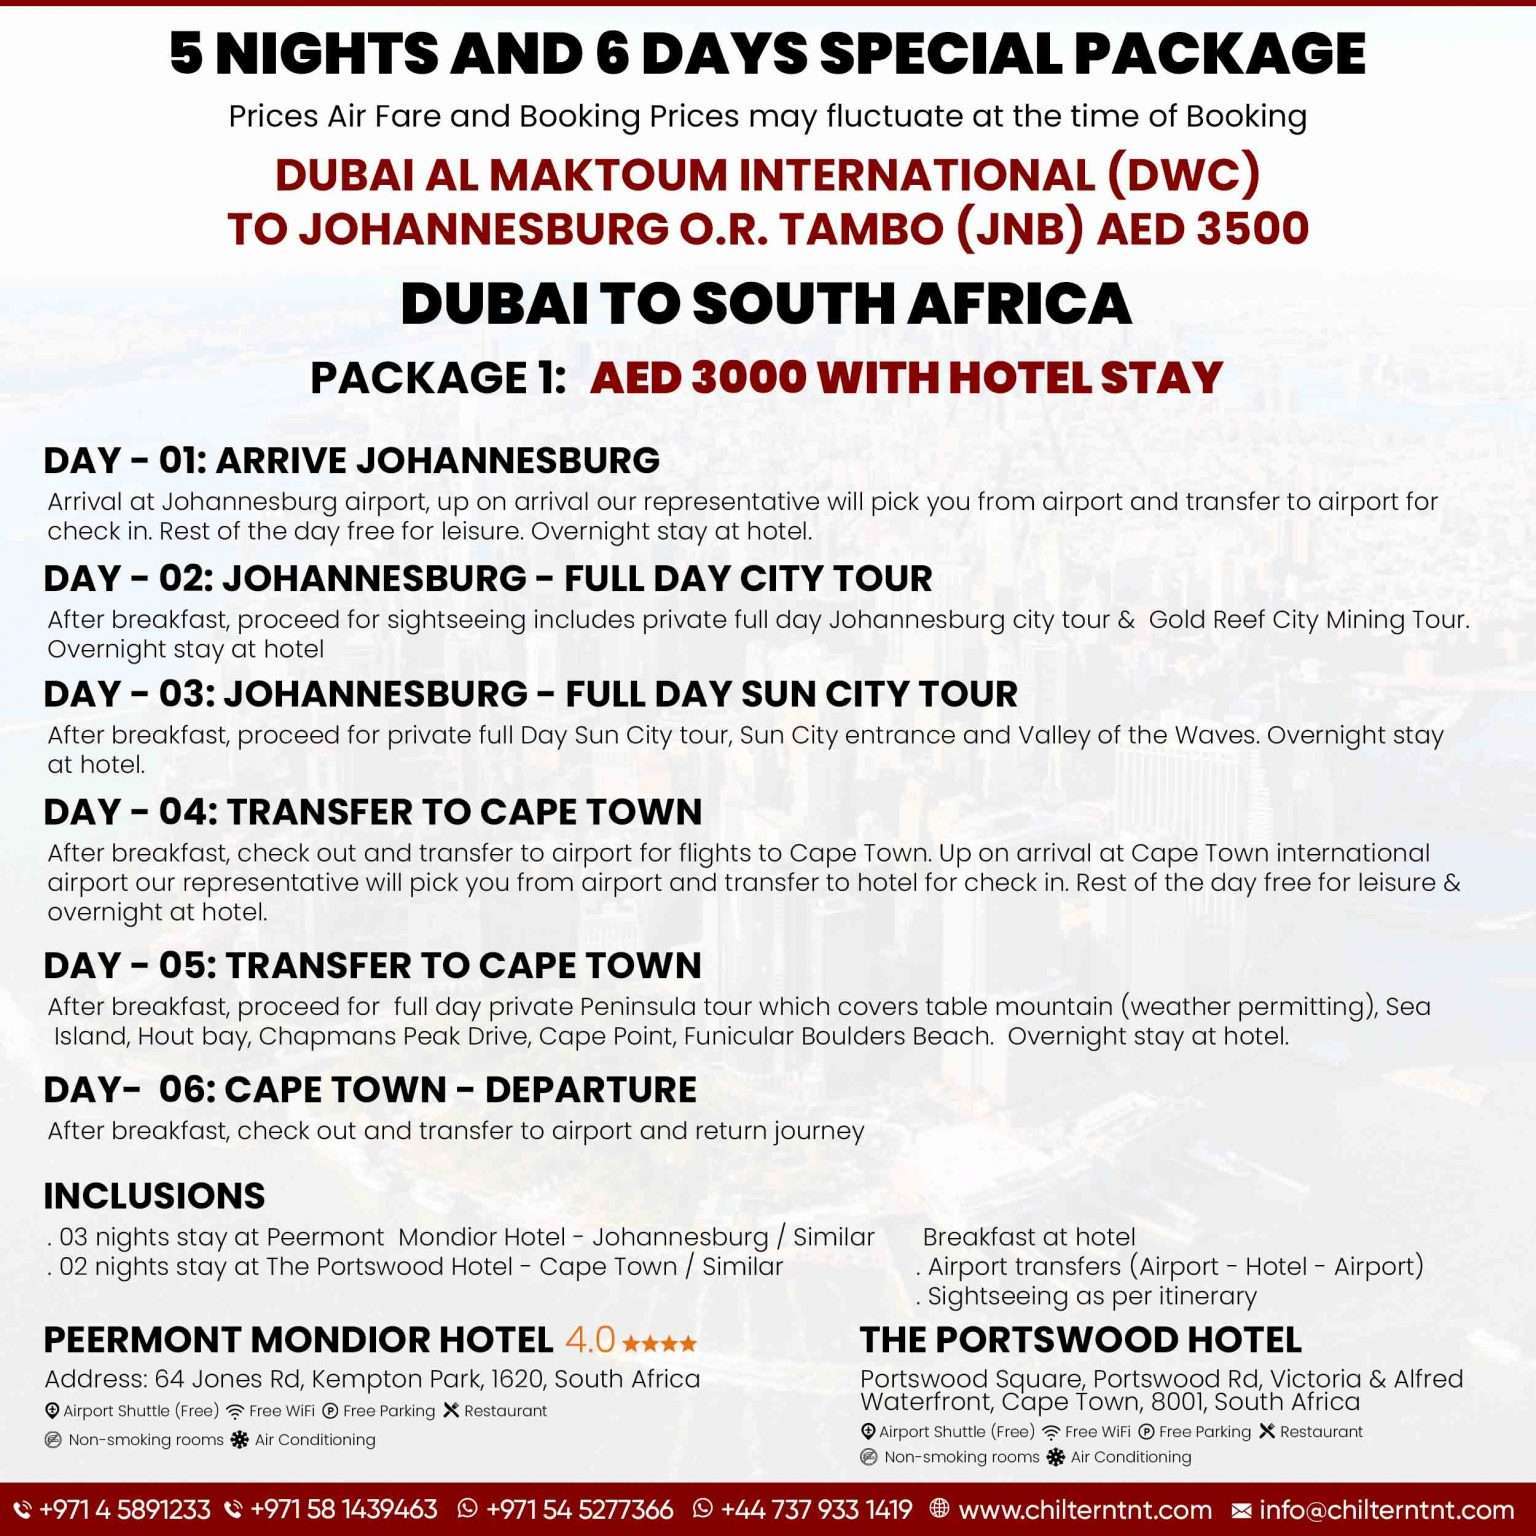 Dubai-to-South-Africa-package-1536x1536